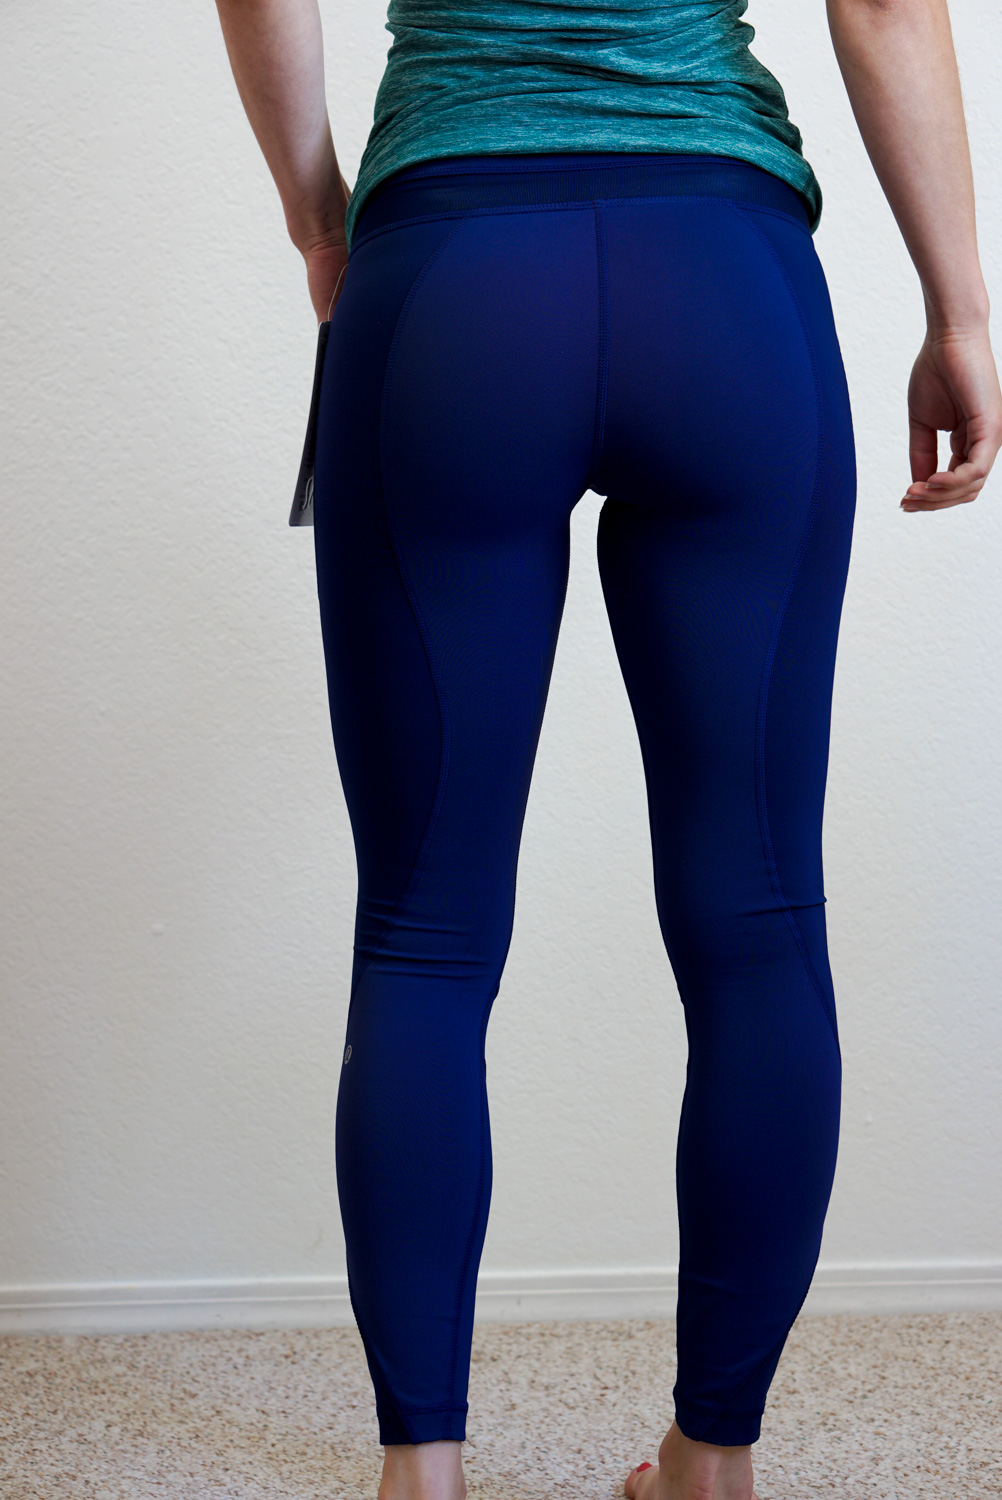 Lululemon Compression Tights Reviews For Women